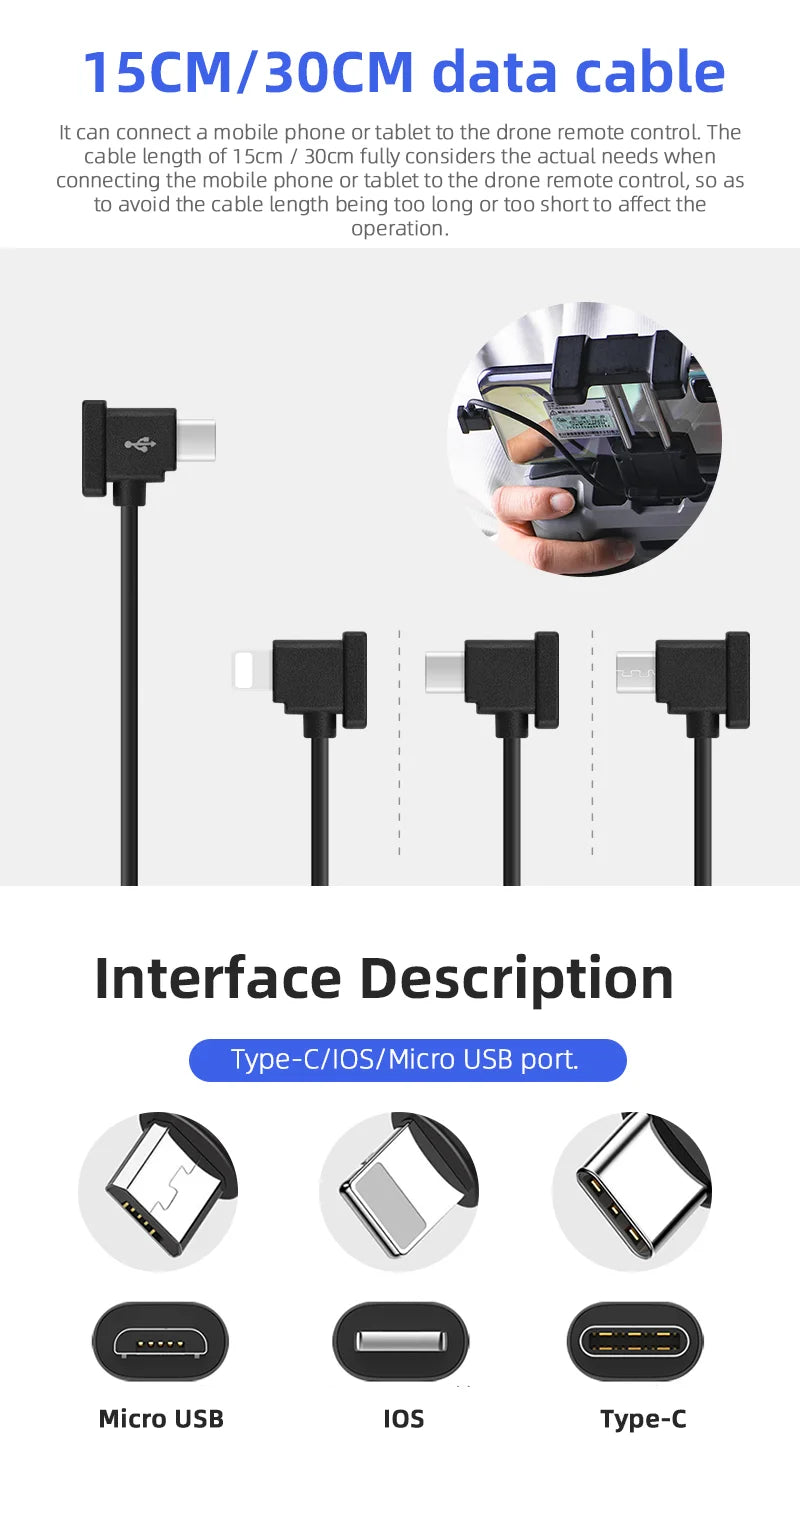 5.8GHz Yagi Antenna, 15CM/BOCM data cable can connect a mobile phone or tablet to the drone remote